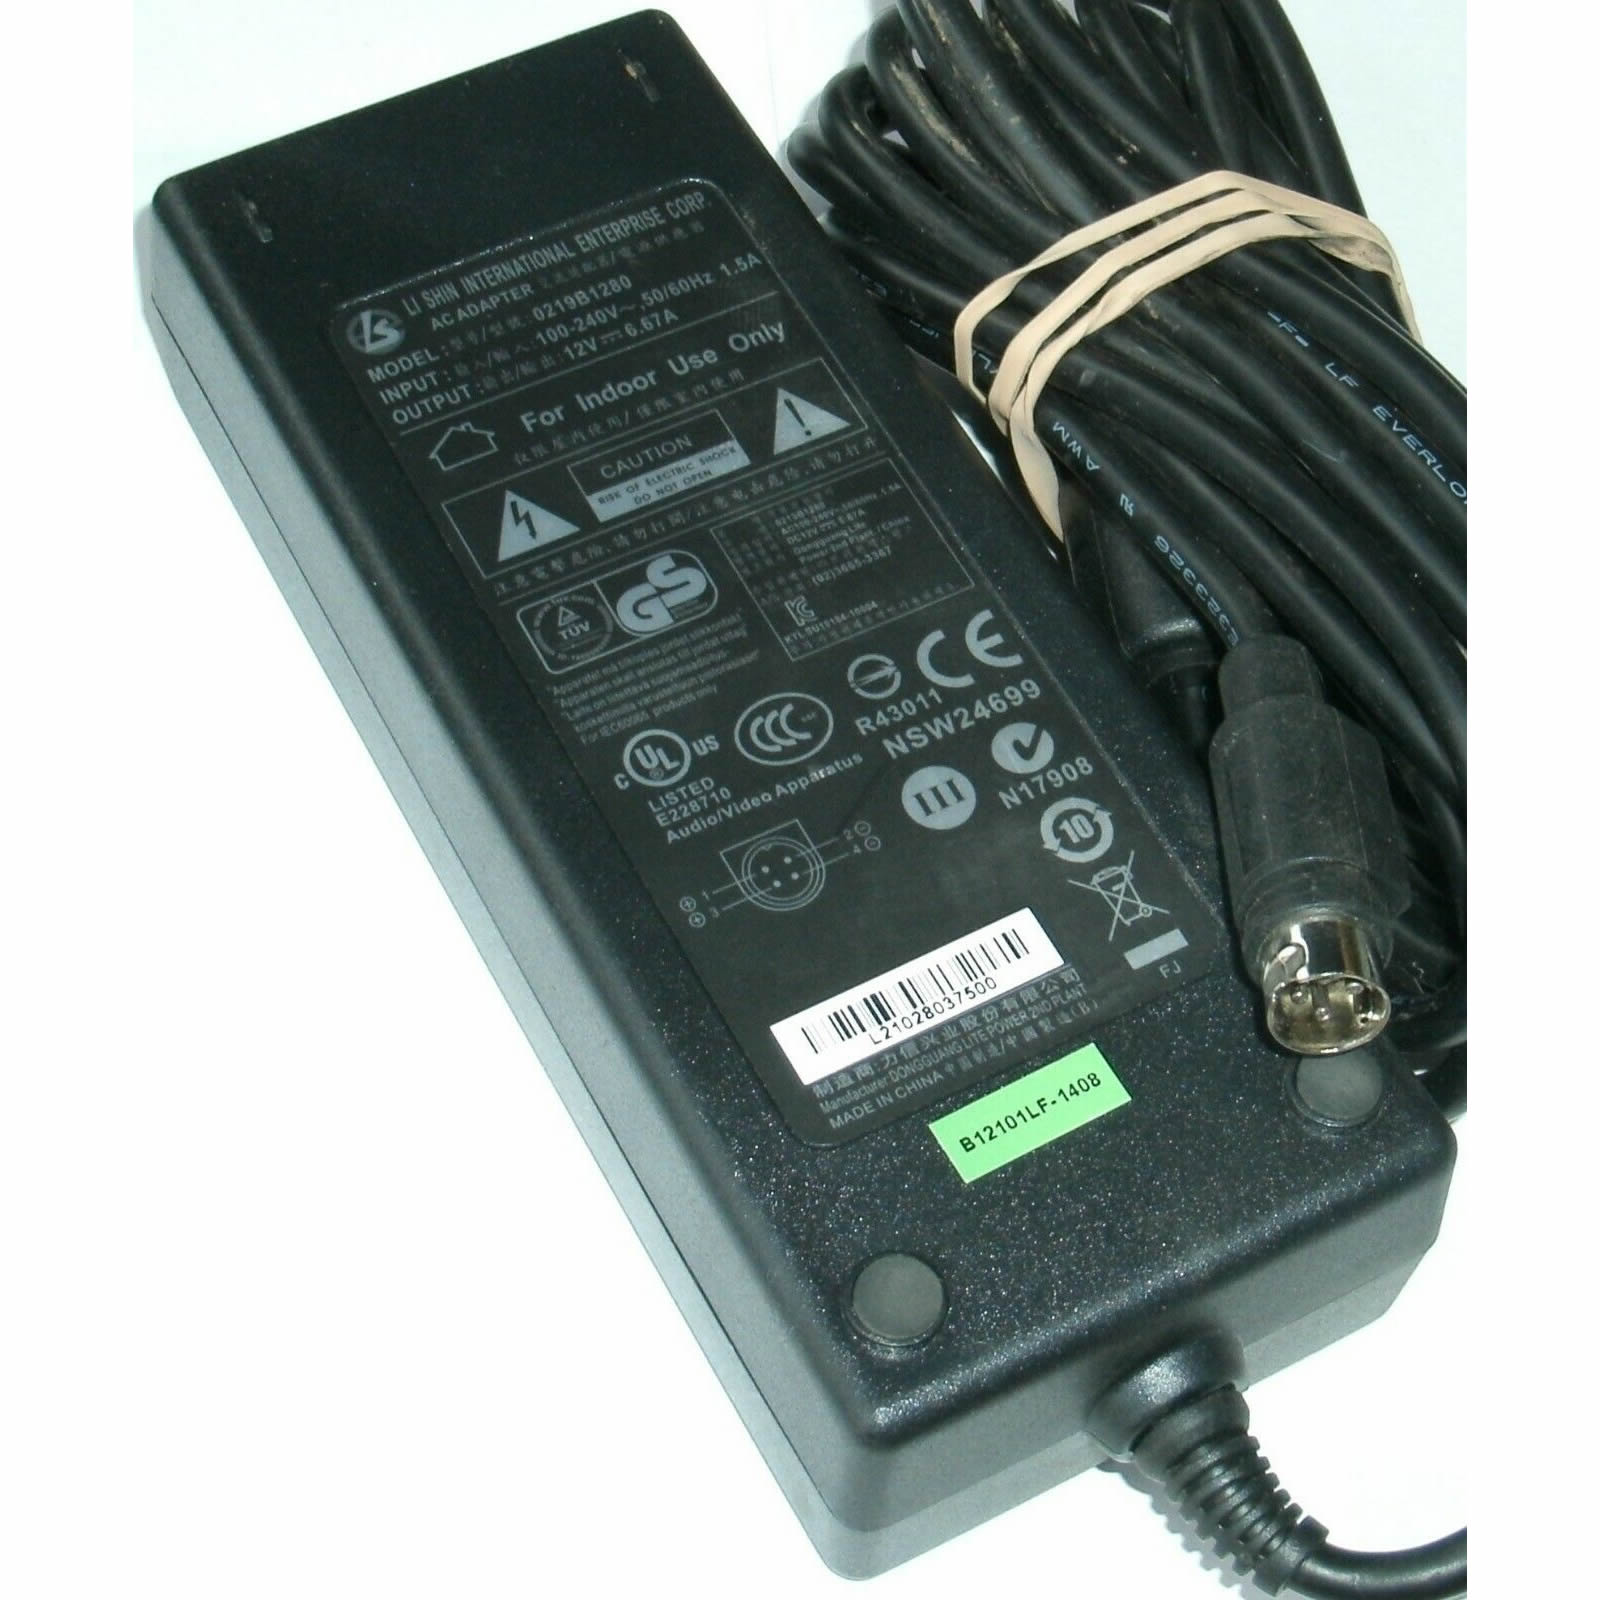 0219B1280 PA-1081-11 12V 6.67A 80W Original AC DC Adapter Charger Power Supply For ASUS PW201 Lcd Monitor